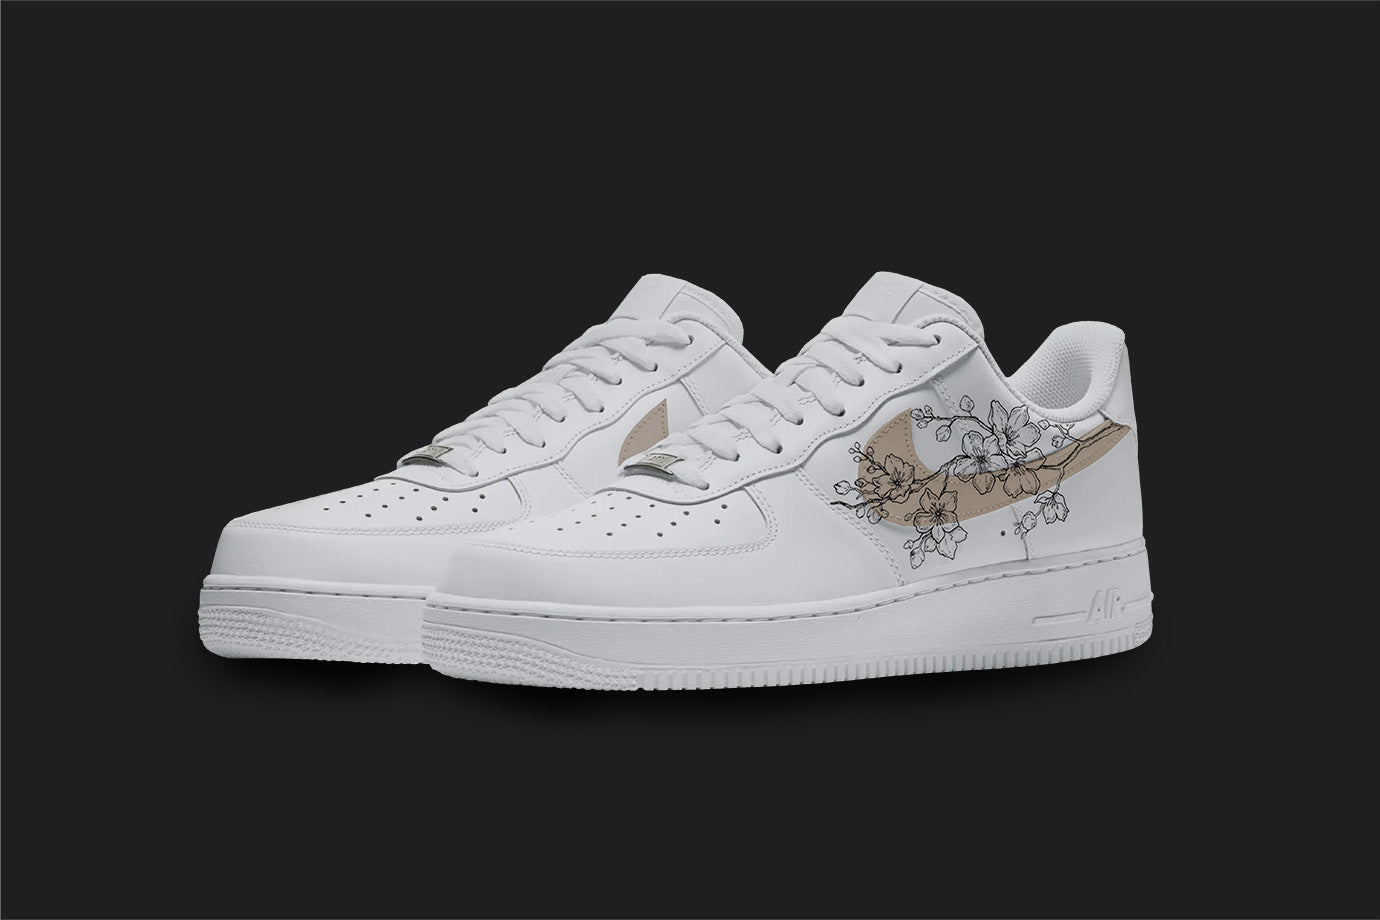 The image is of a Custom Nike Air force 1 sneaker pair on a blank black background. The white custom sneakers have a beige nike logo with floral illustrations on the sides.